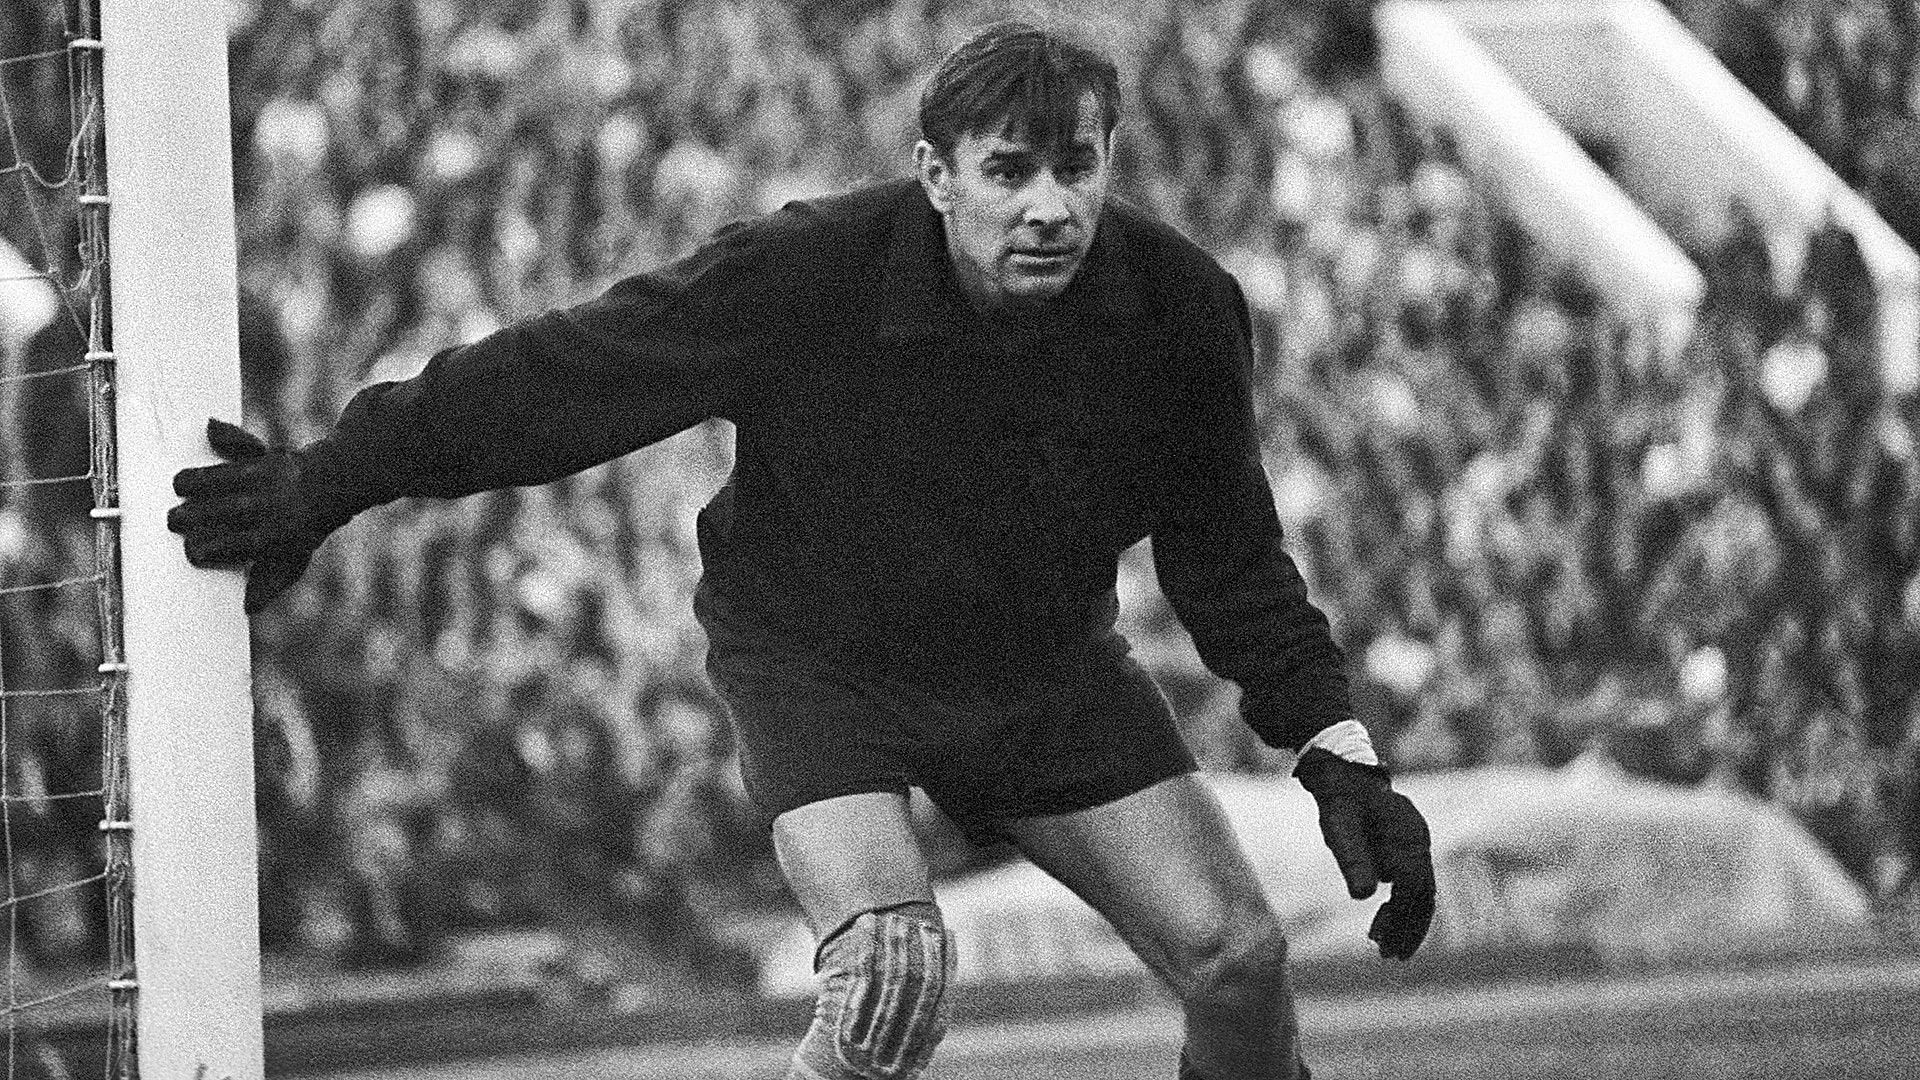 Lev Yashin won nine European Goalkeeper of the Year awards and the award is now named after him.